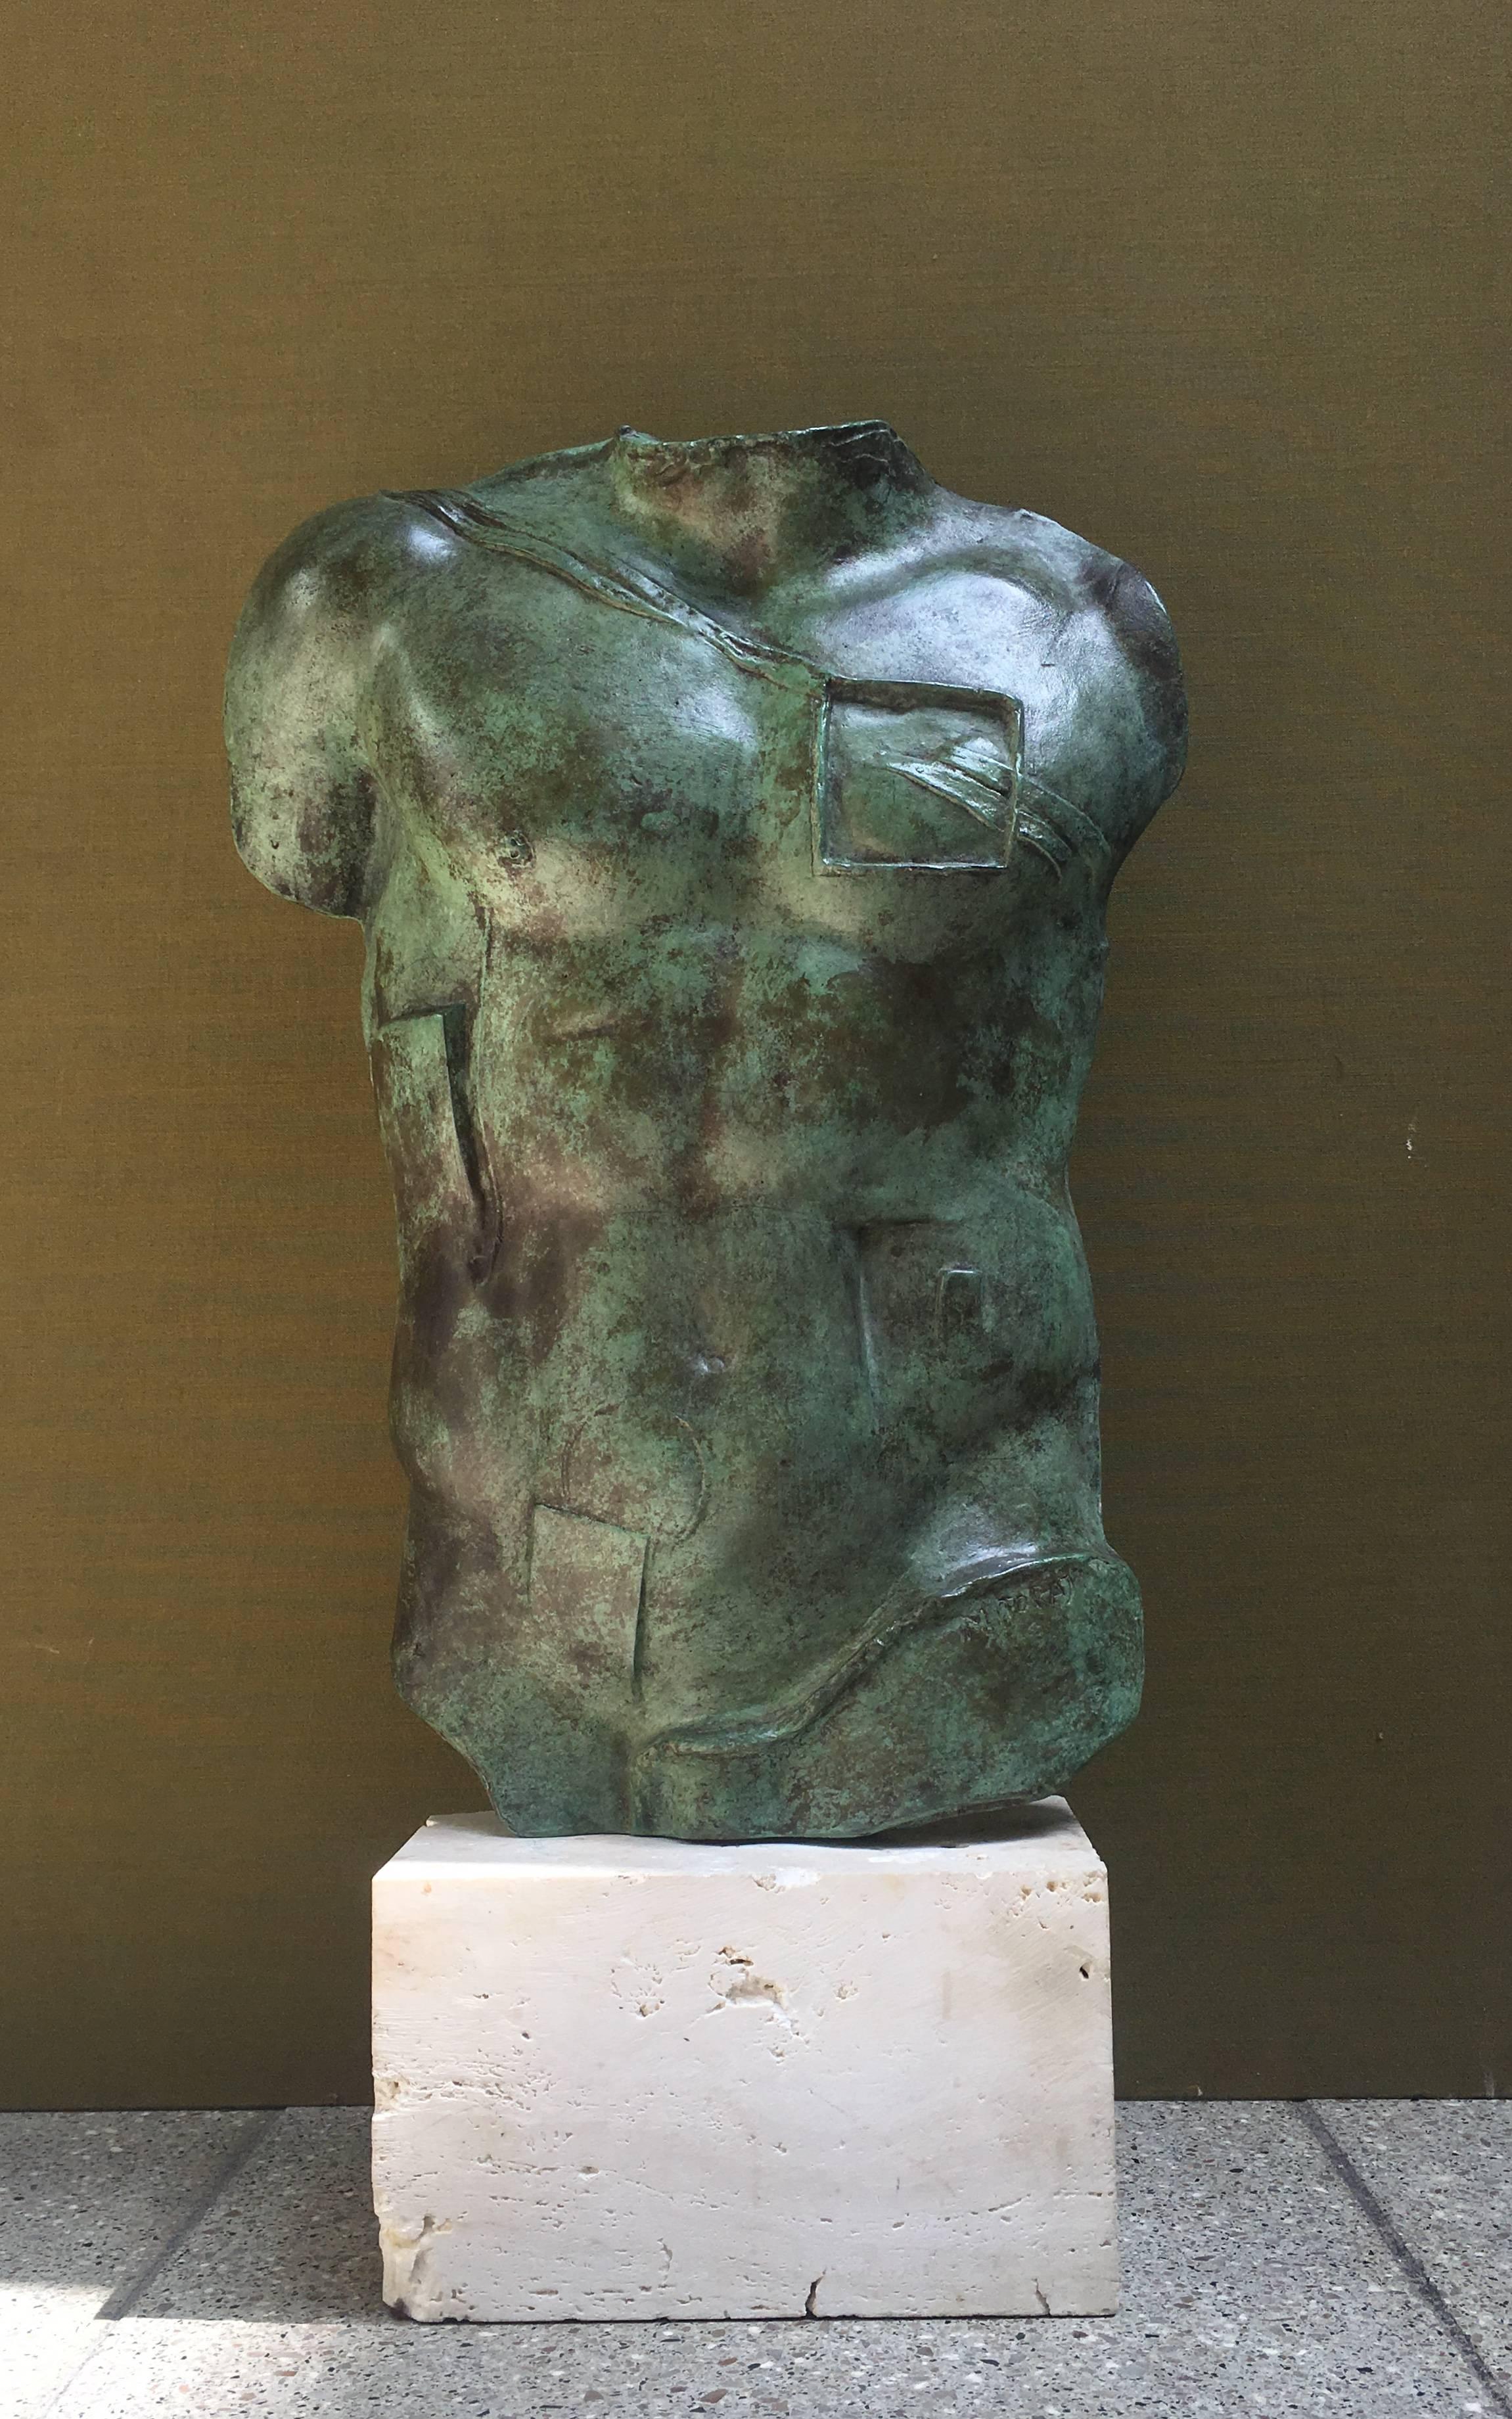 Igor Mitoraj (1944-2014)
“Persée” Torso in bronze with a green antic patina.
Signed Igor Mitoraj and numbered B522/1000 HC
White stone base.
The bronze comes with its 